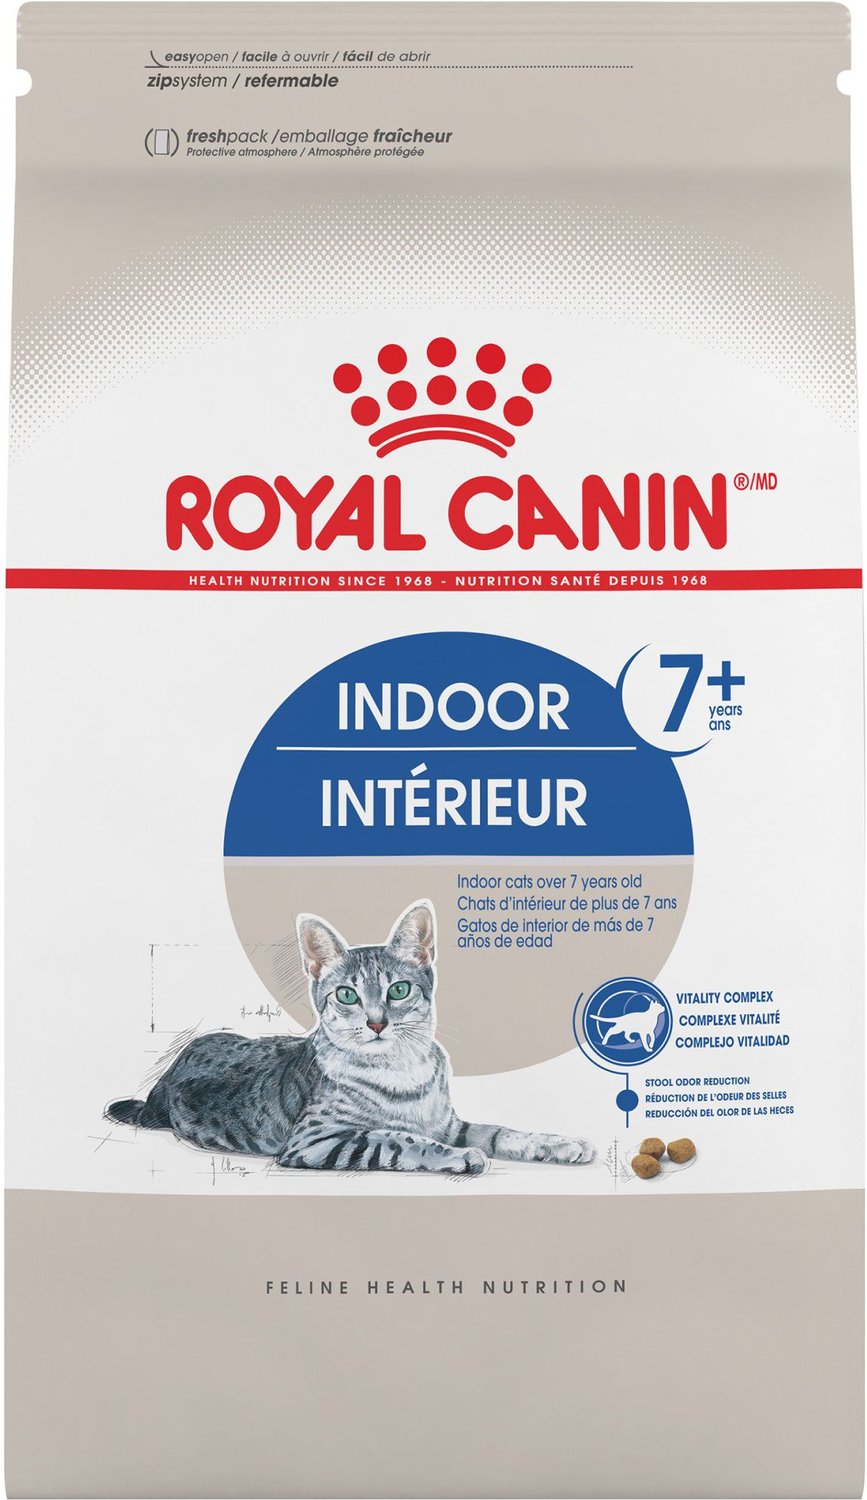 Royal Canin Indoor 7+ Dry Cat Food